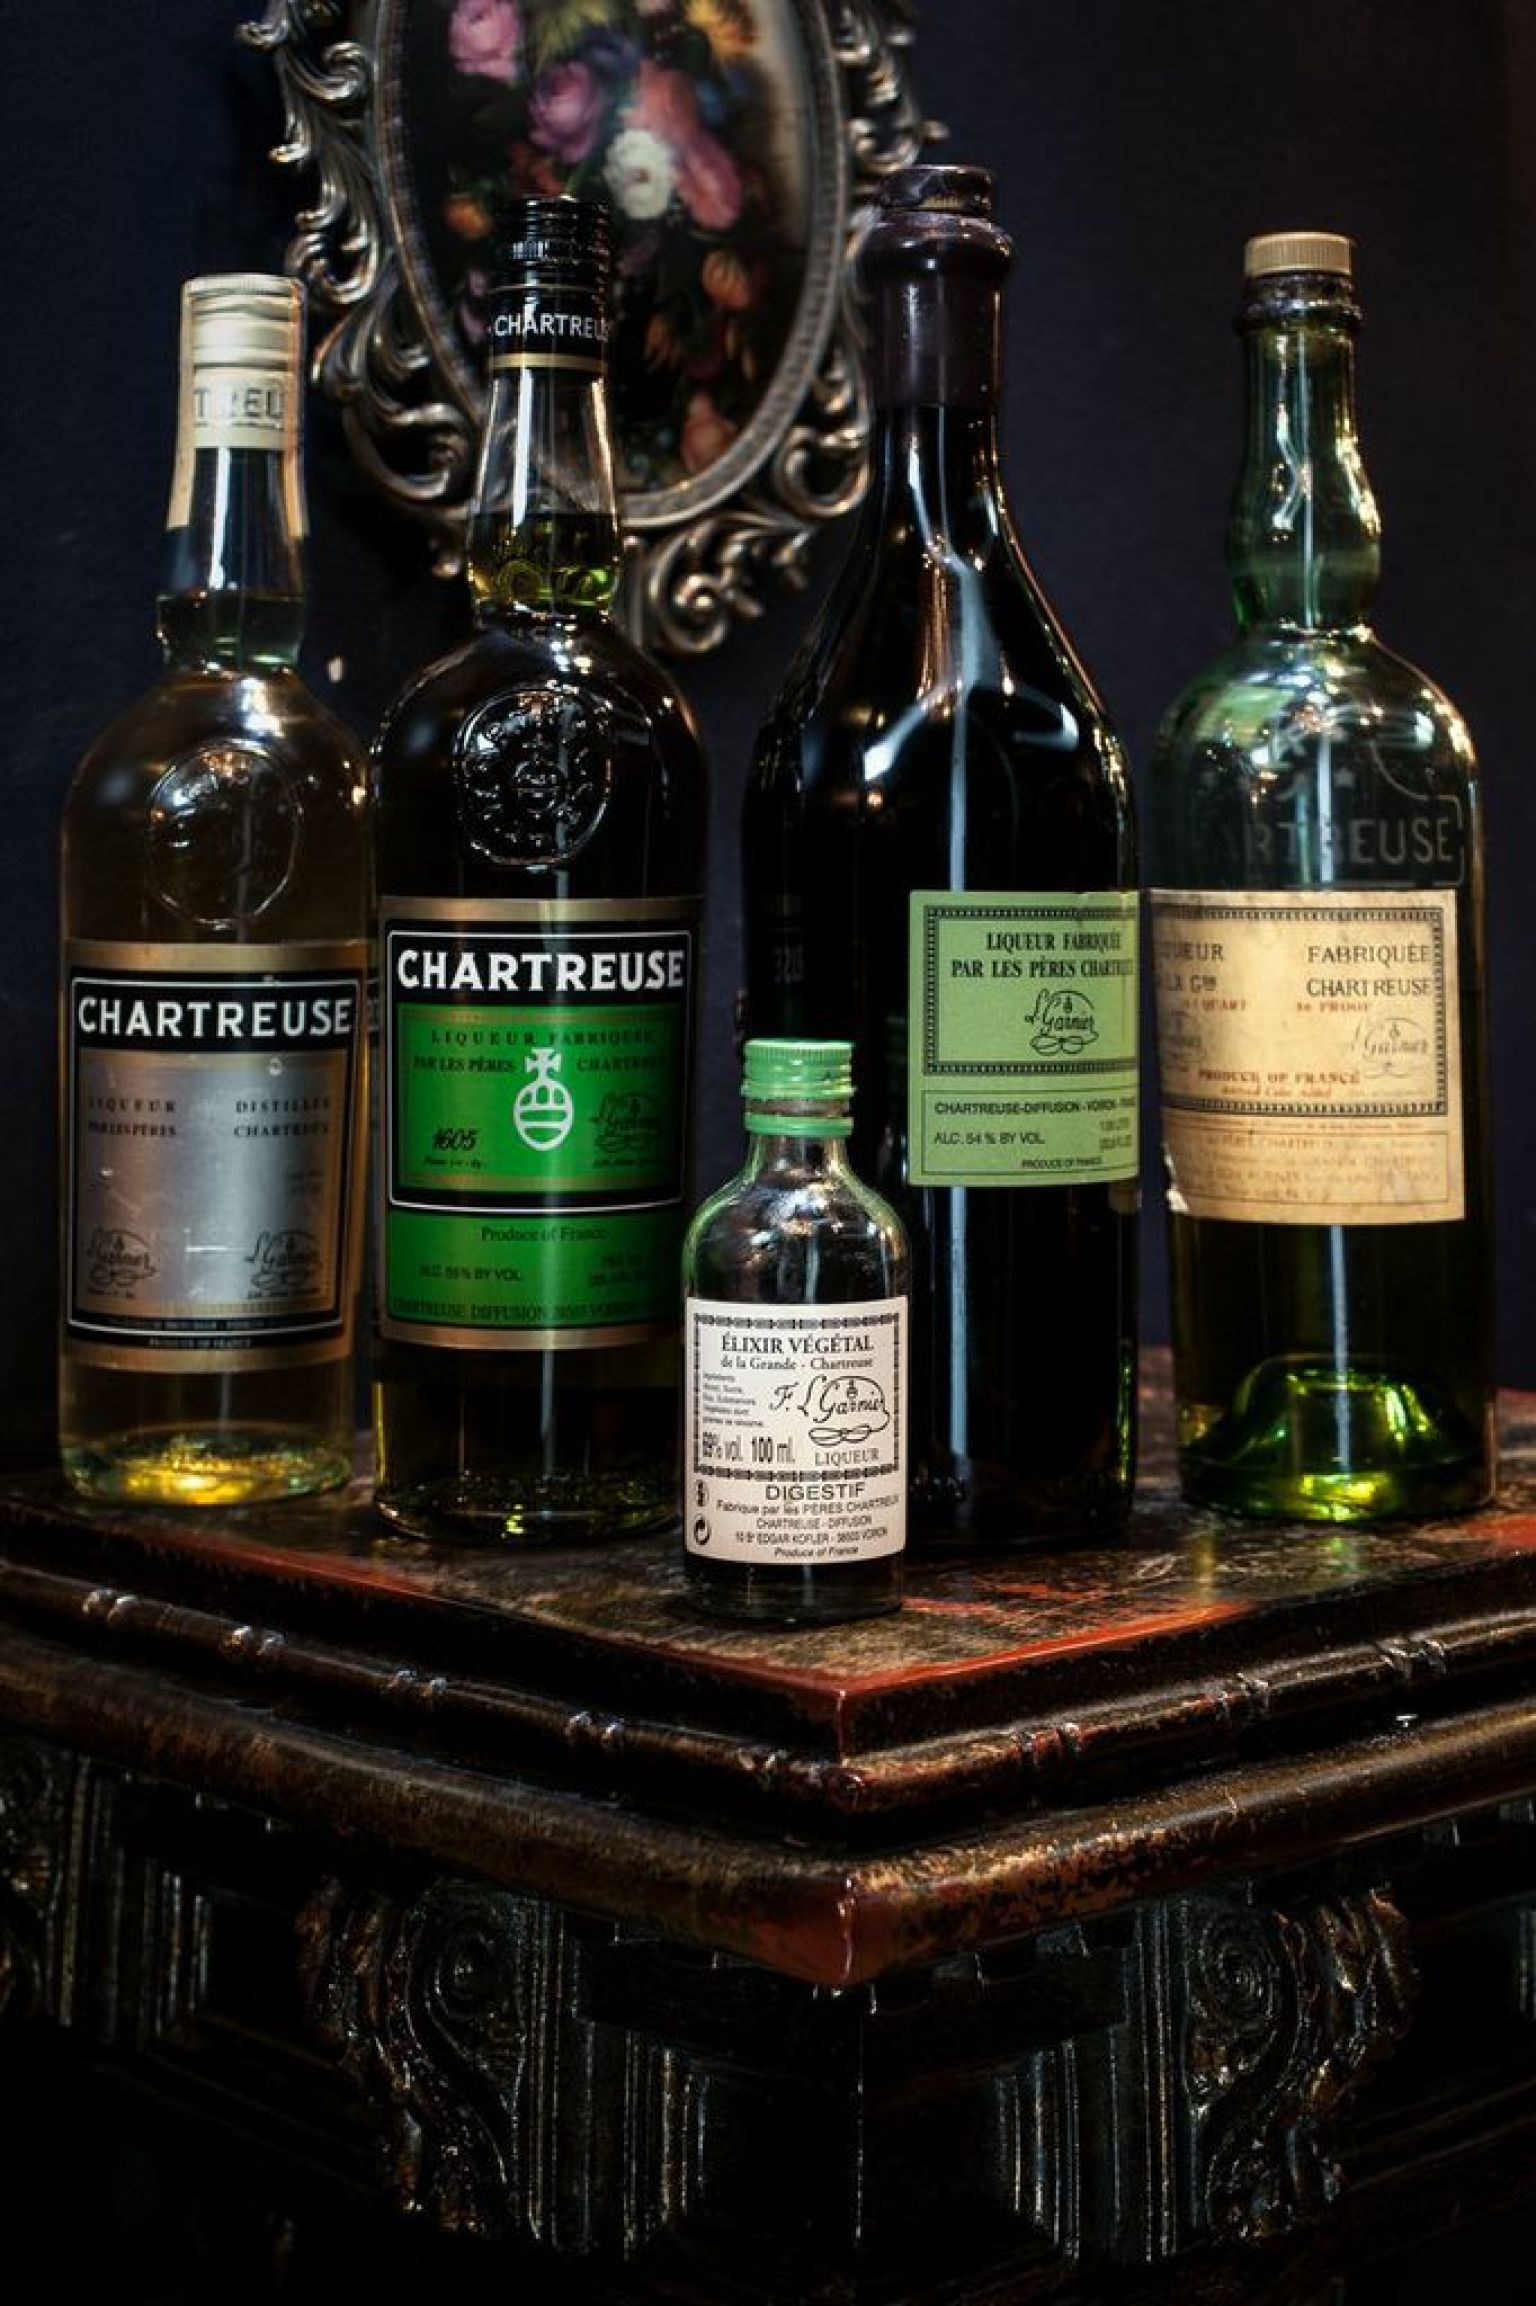 Vintage Liquors Give A Taste Of Decades-Old Spirits ...